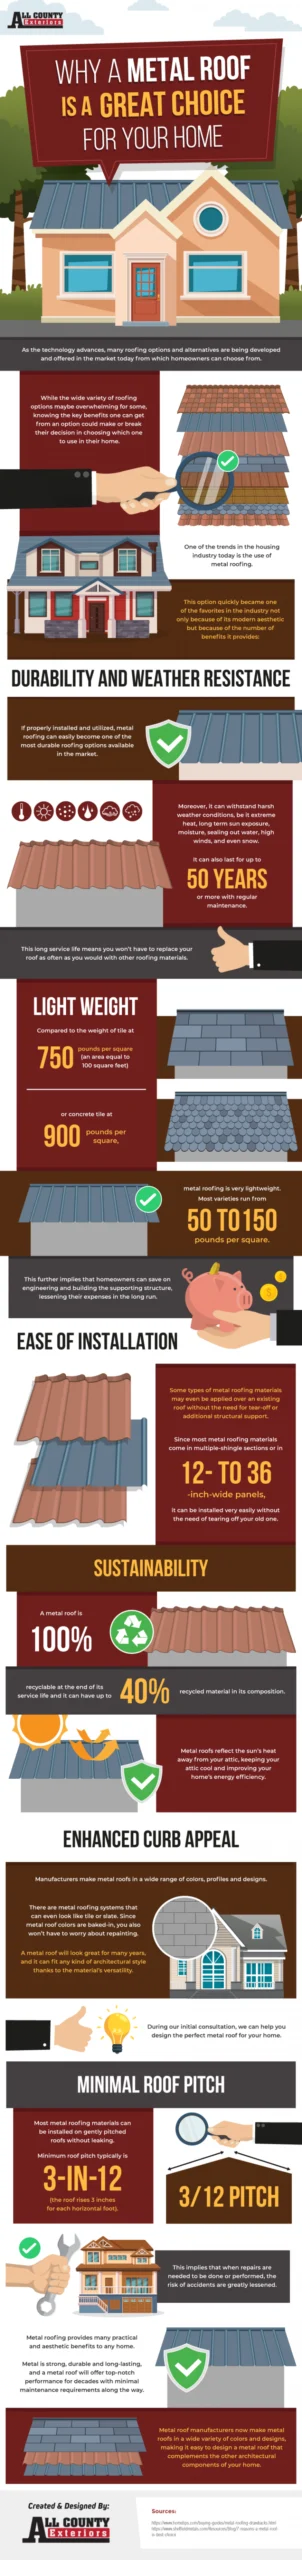 Why A Metal Roof Is A Great Choice For Your Home